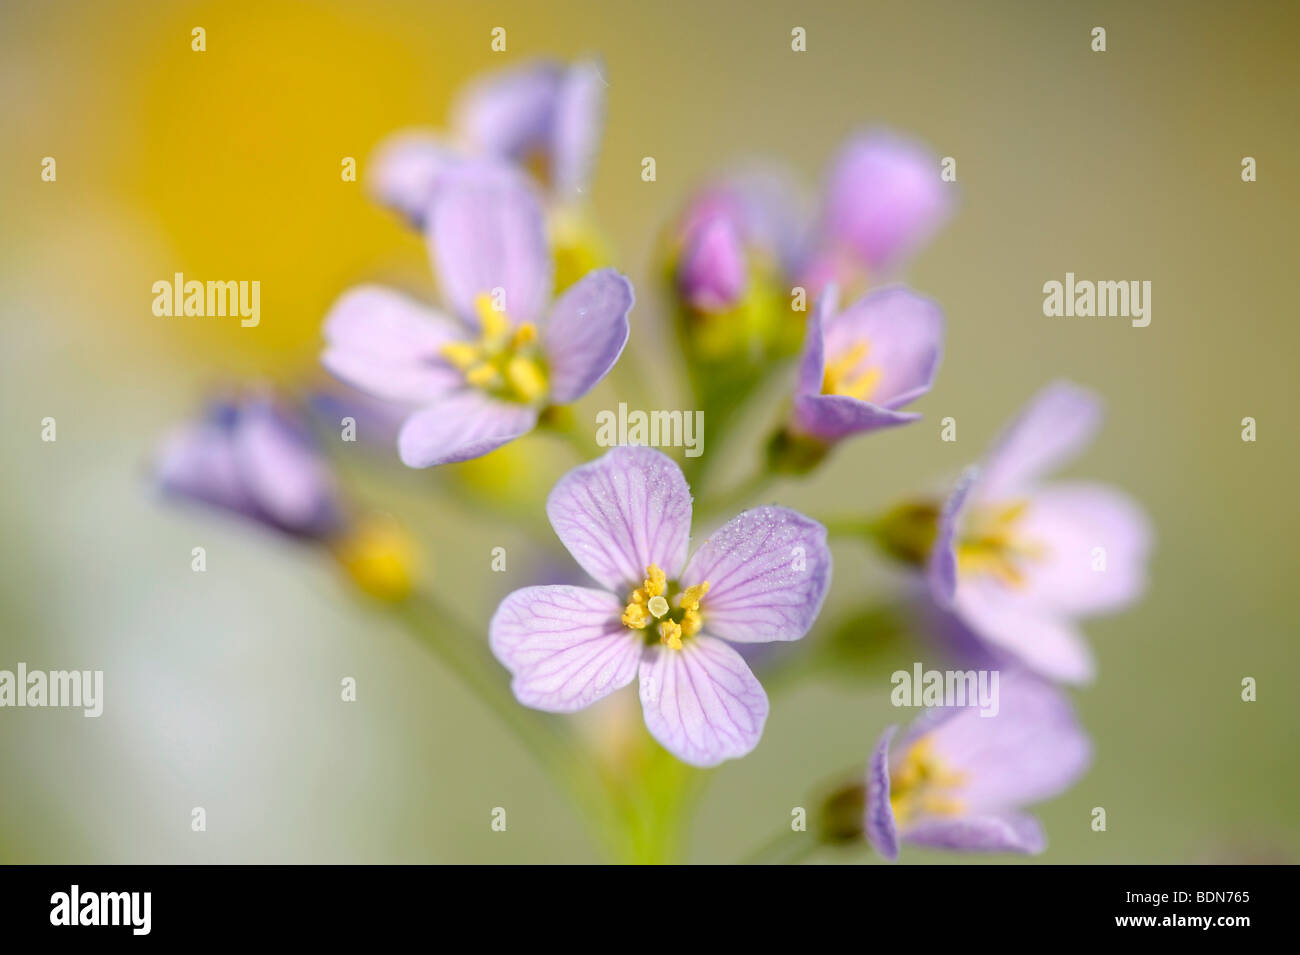 Cuckoo Flower (Card amines pratensis) on a spring meadow Stock Photo